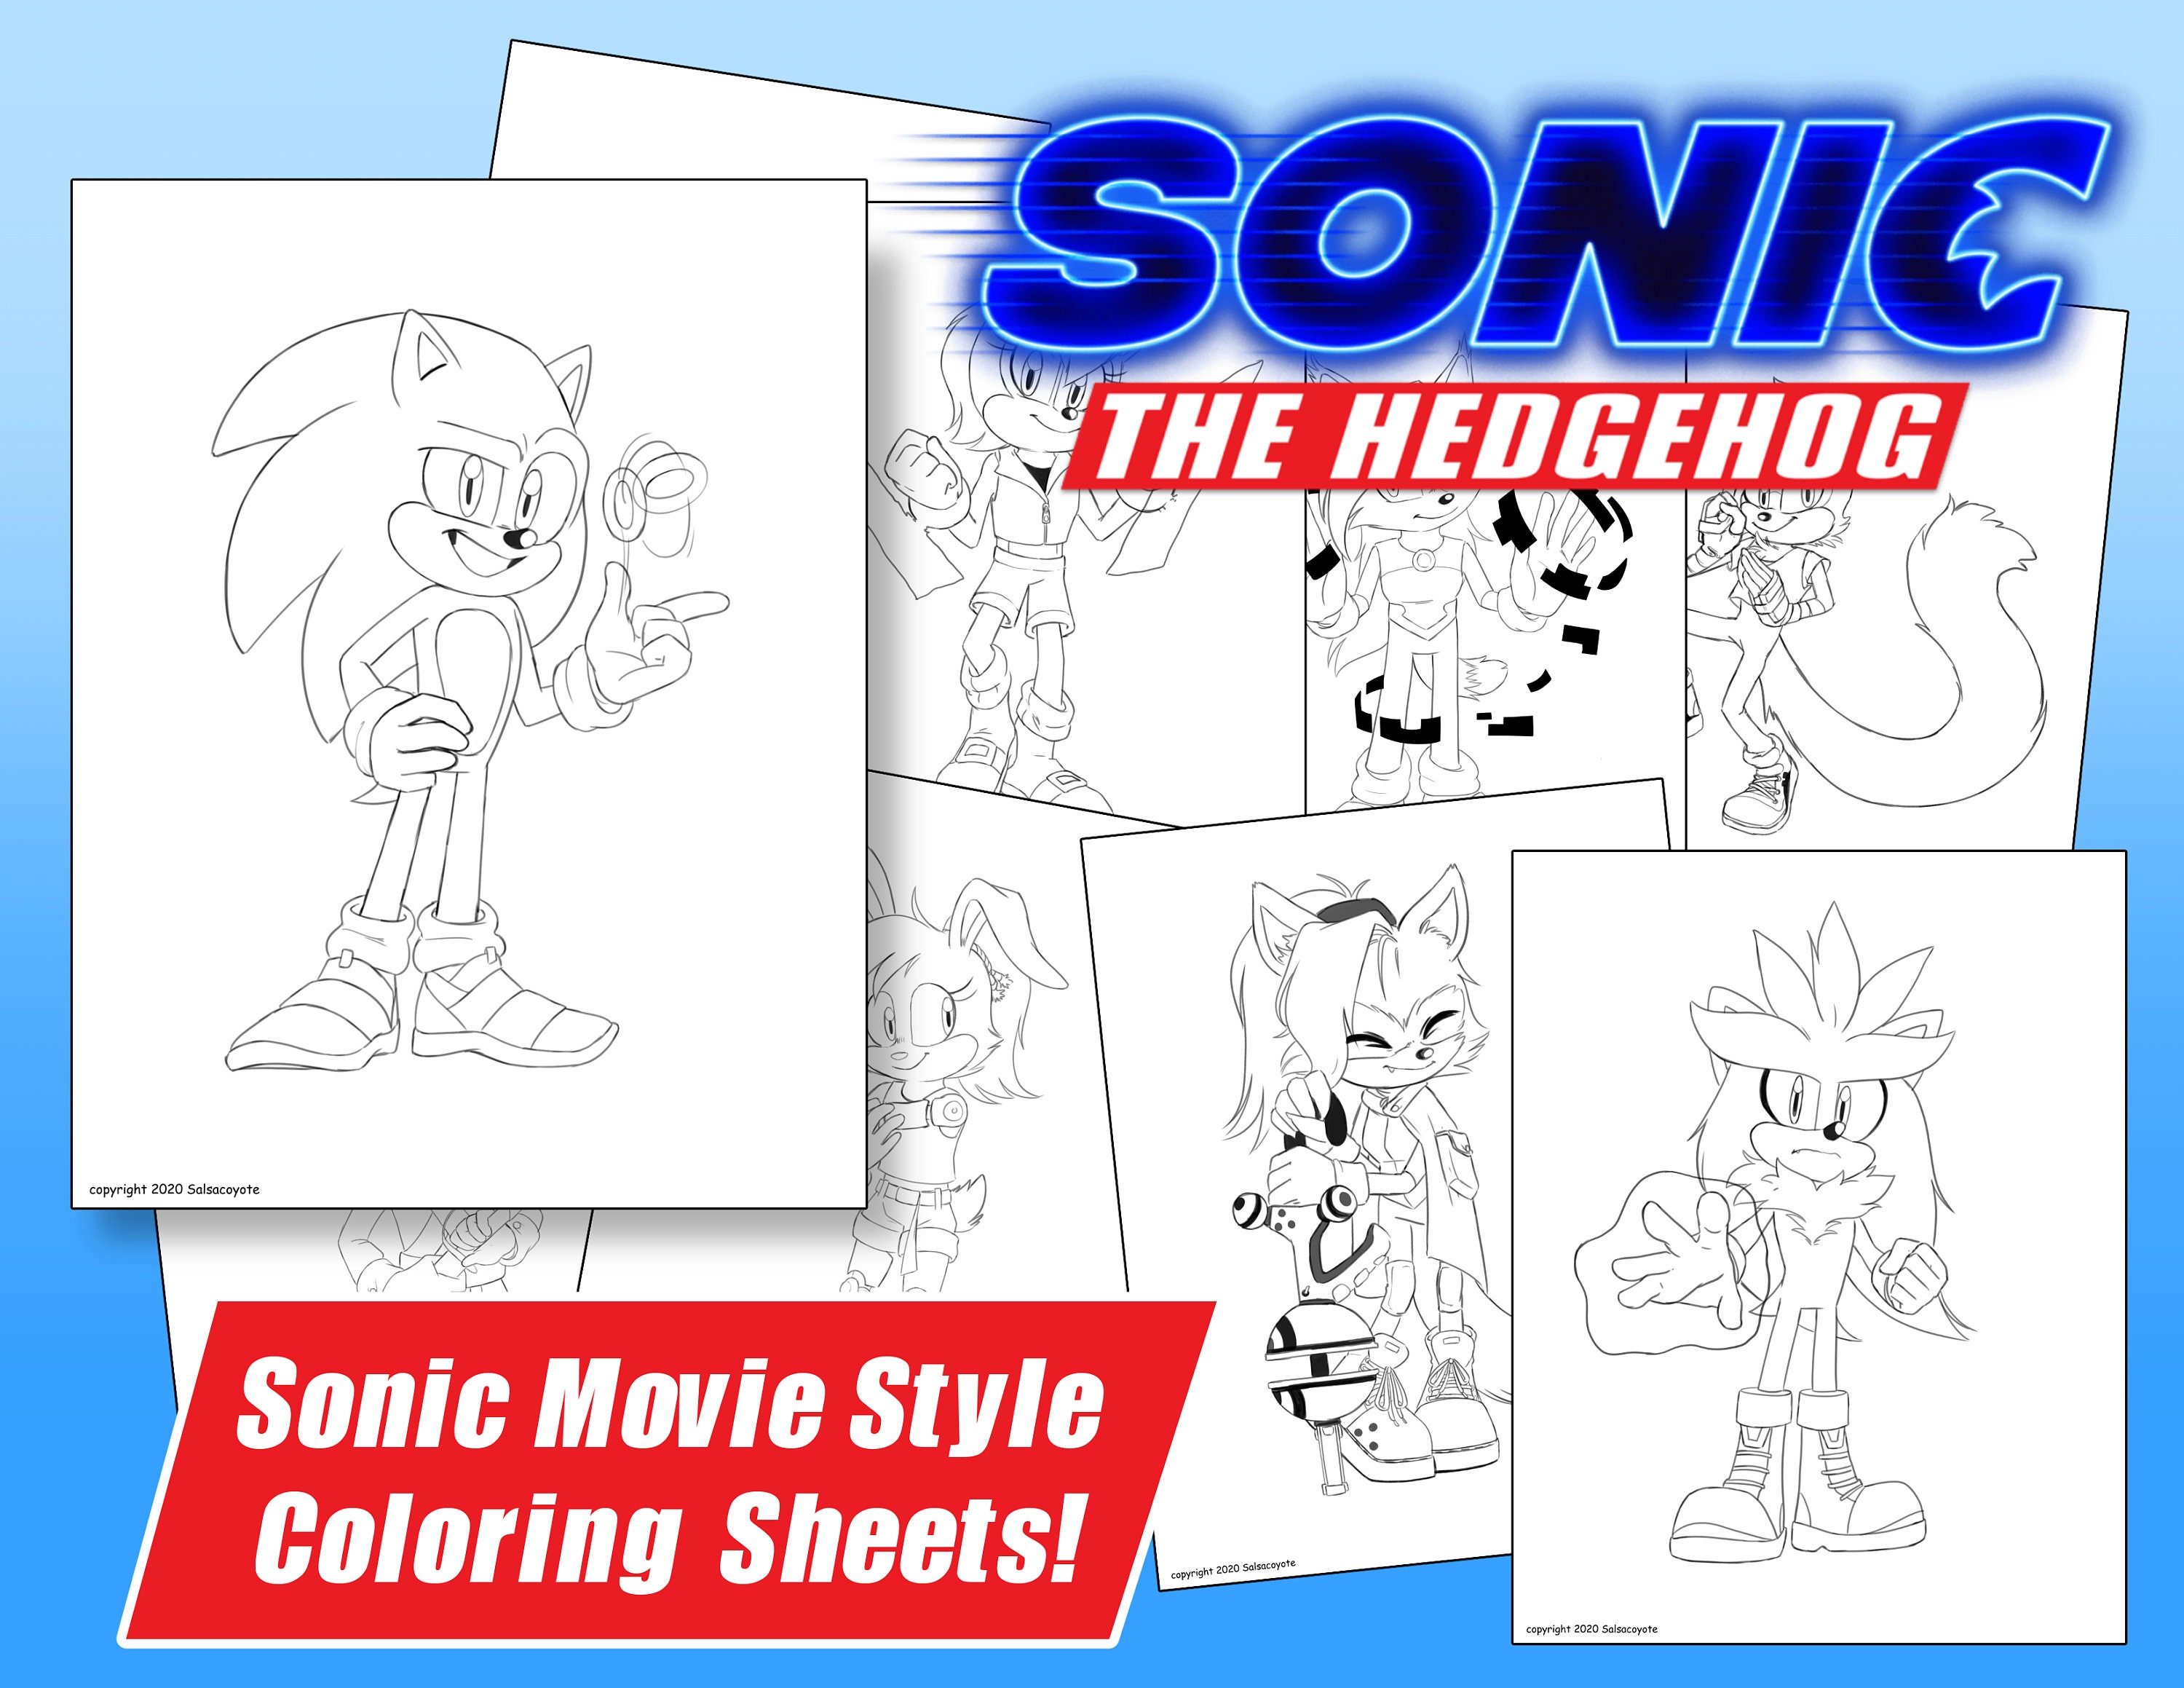 Sonic Movie 2020 Coloring Pages - Sonic movie 2020 coloring pages.